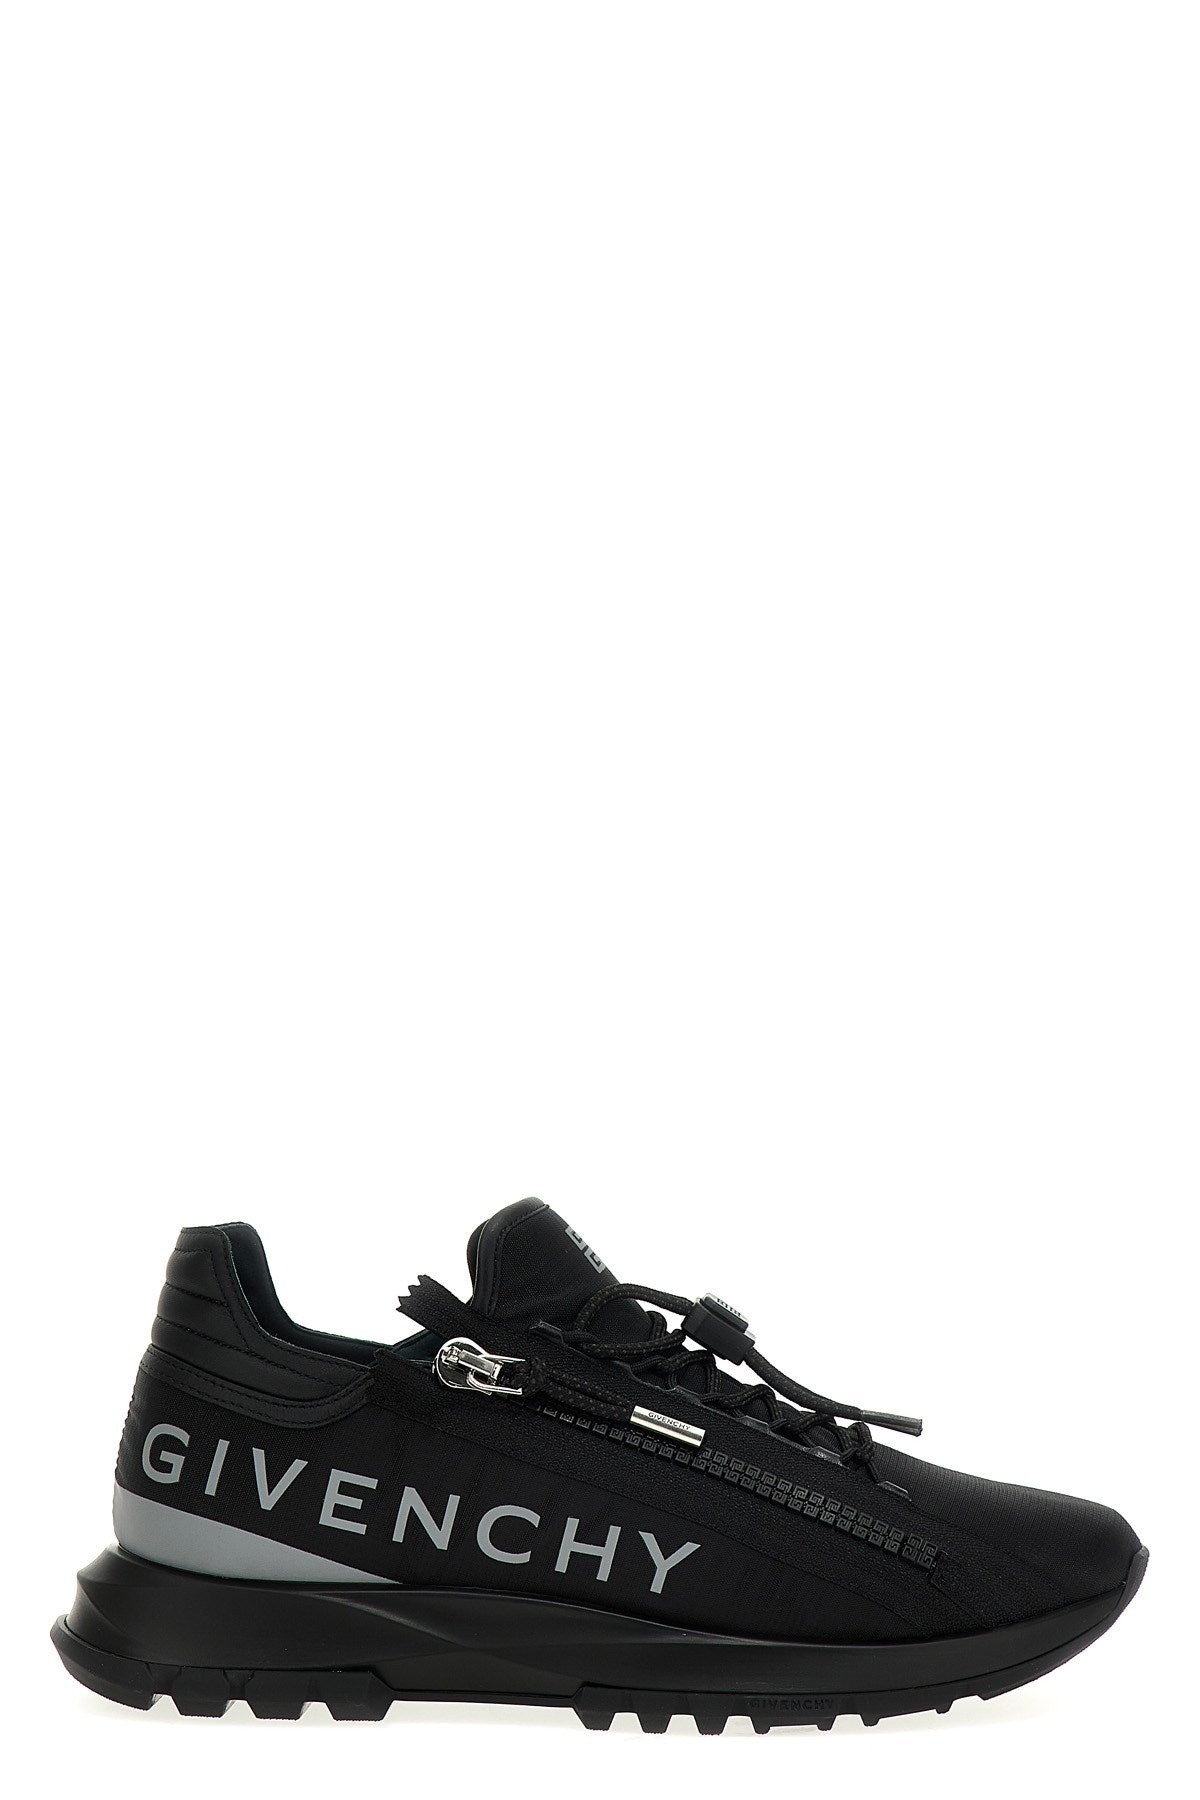 Givenchy Men 'Spectre' Sneakers - 1